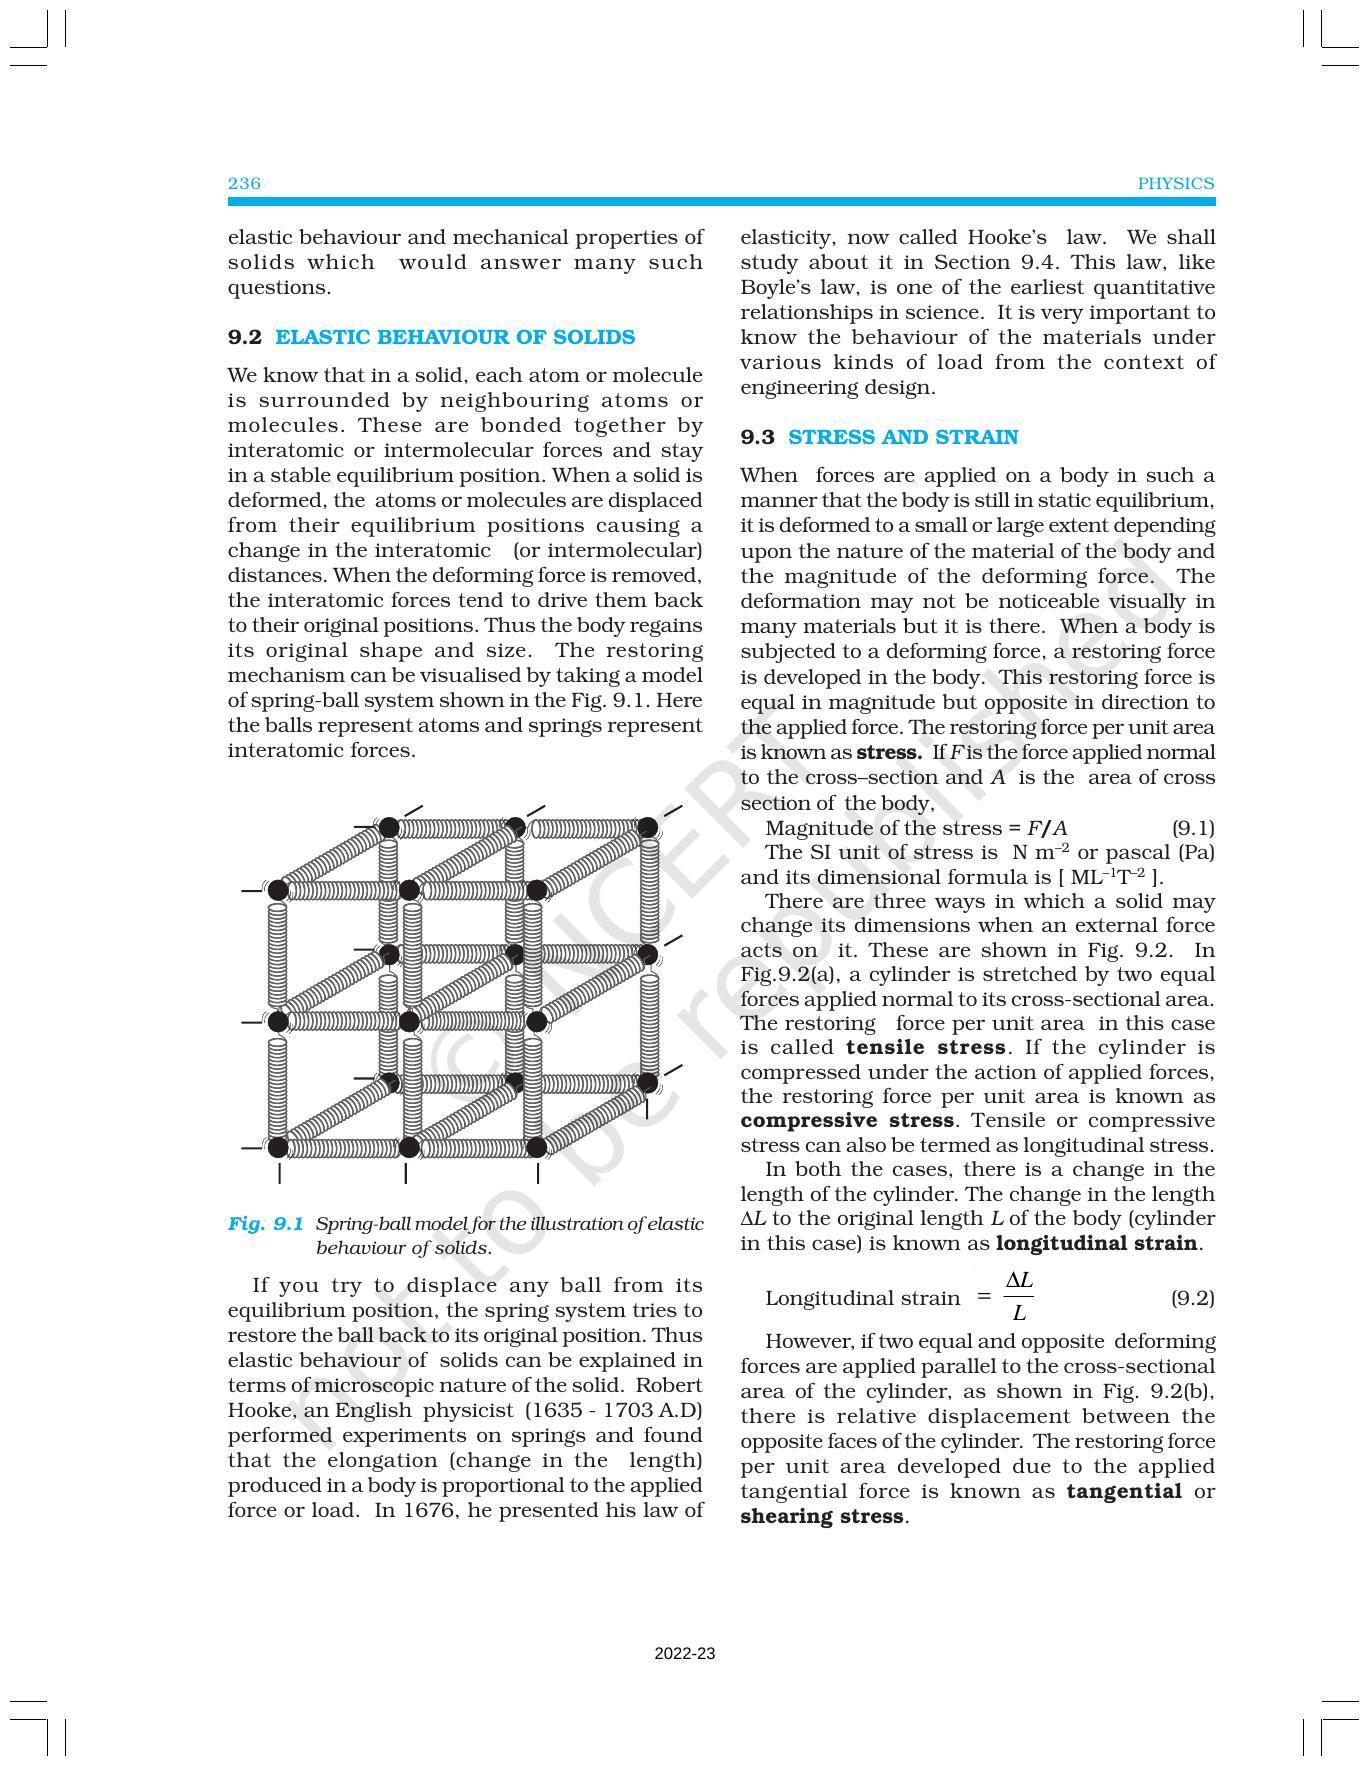 NCERT Book for Class 11 Physics Chapter 9 Mechanical Properties of Solids - Page 2